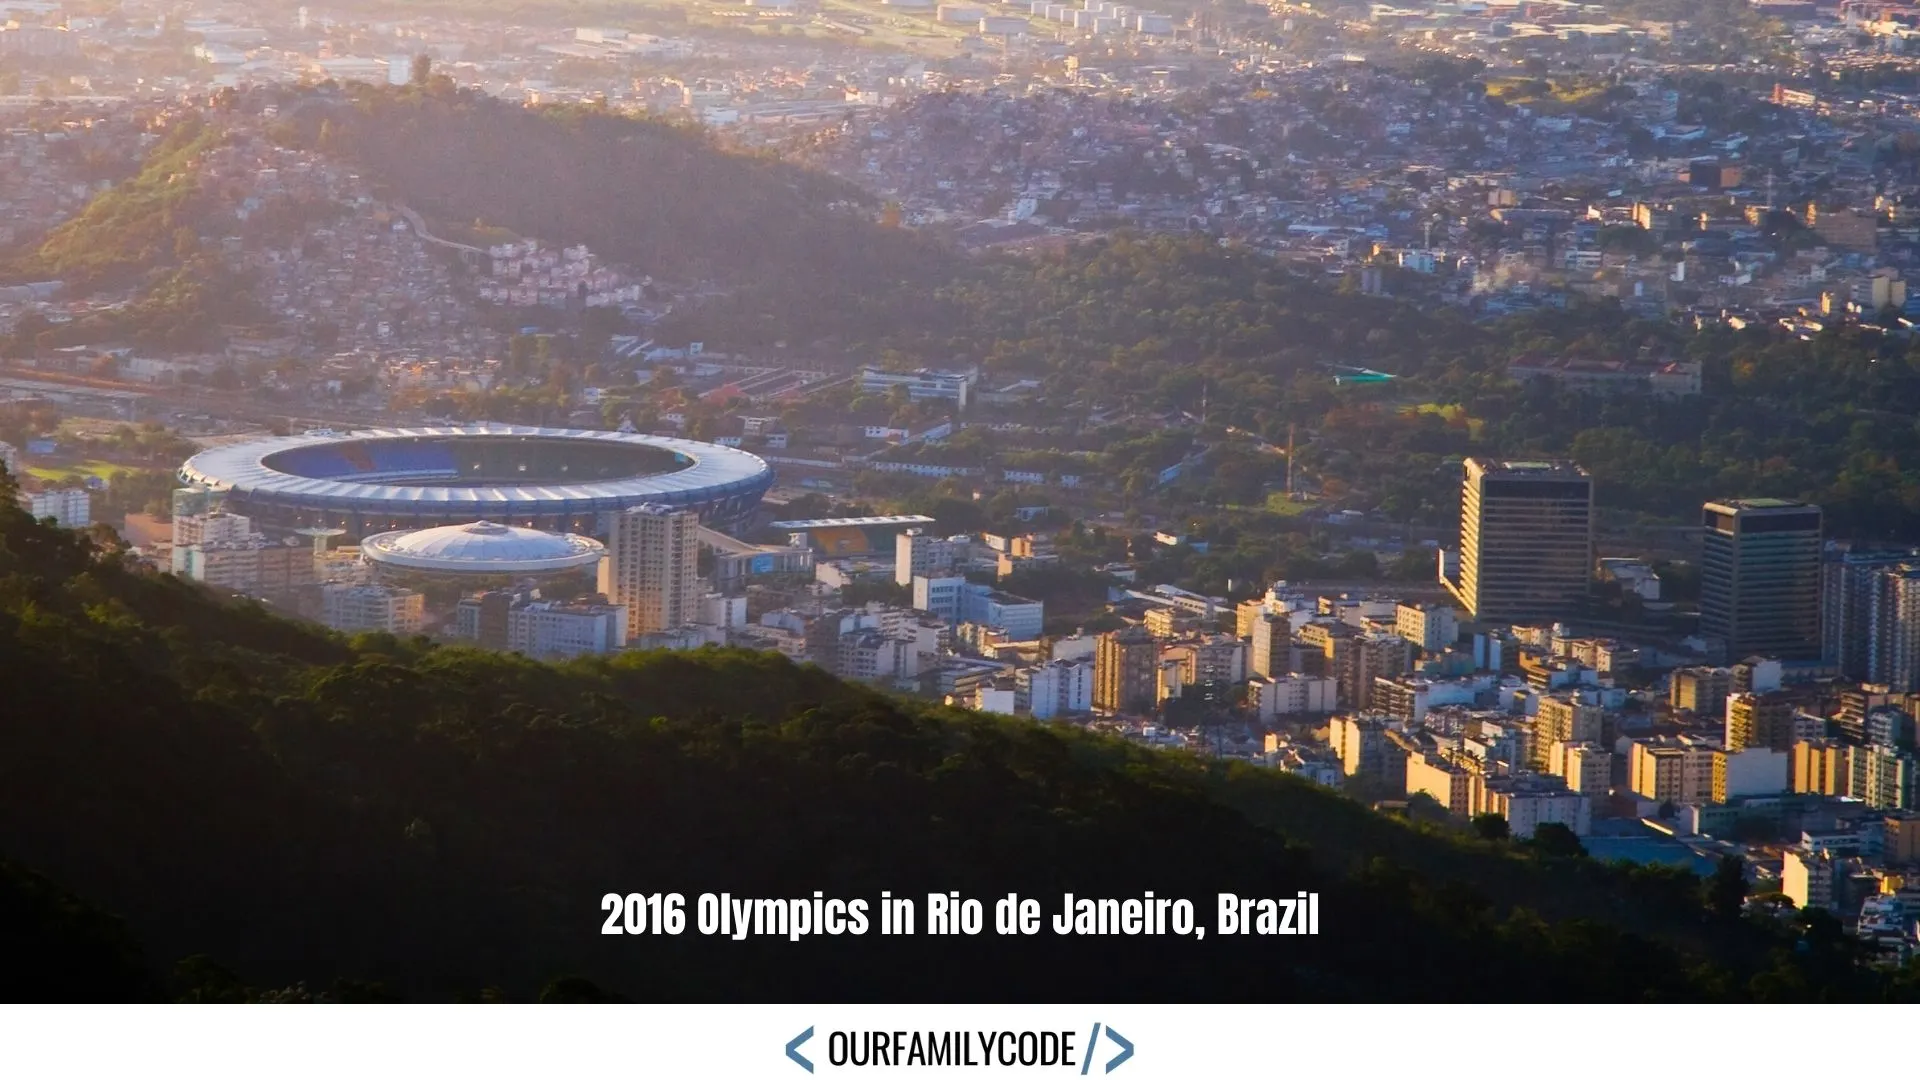 An aerial picture of Rio de Janeiro, Brazil with the Olympic Stadium from the 2016 Summer Olympic Games.